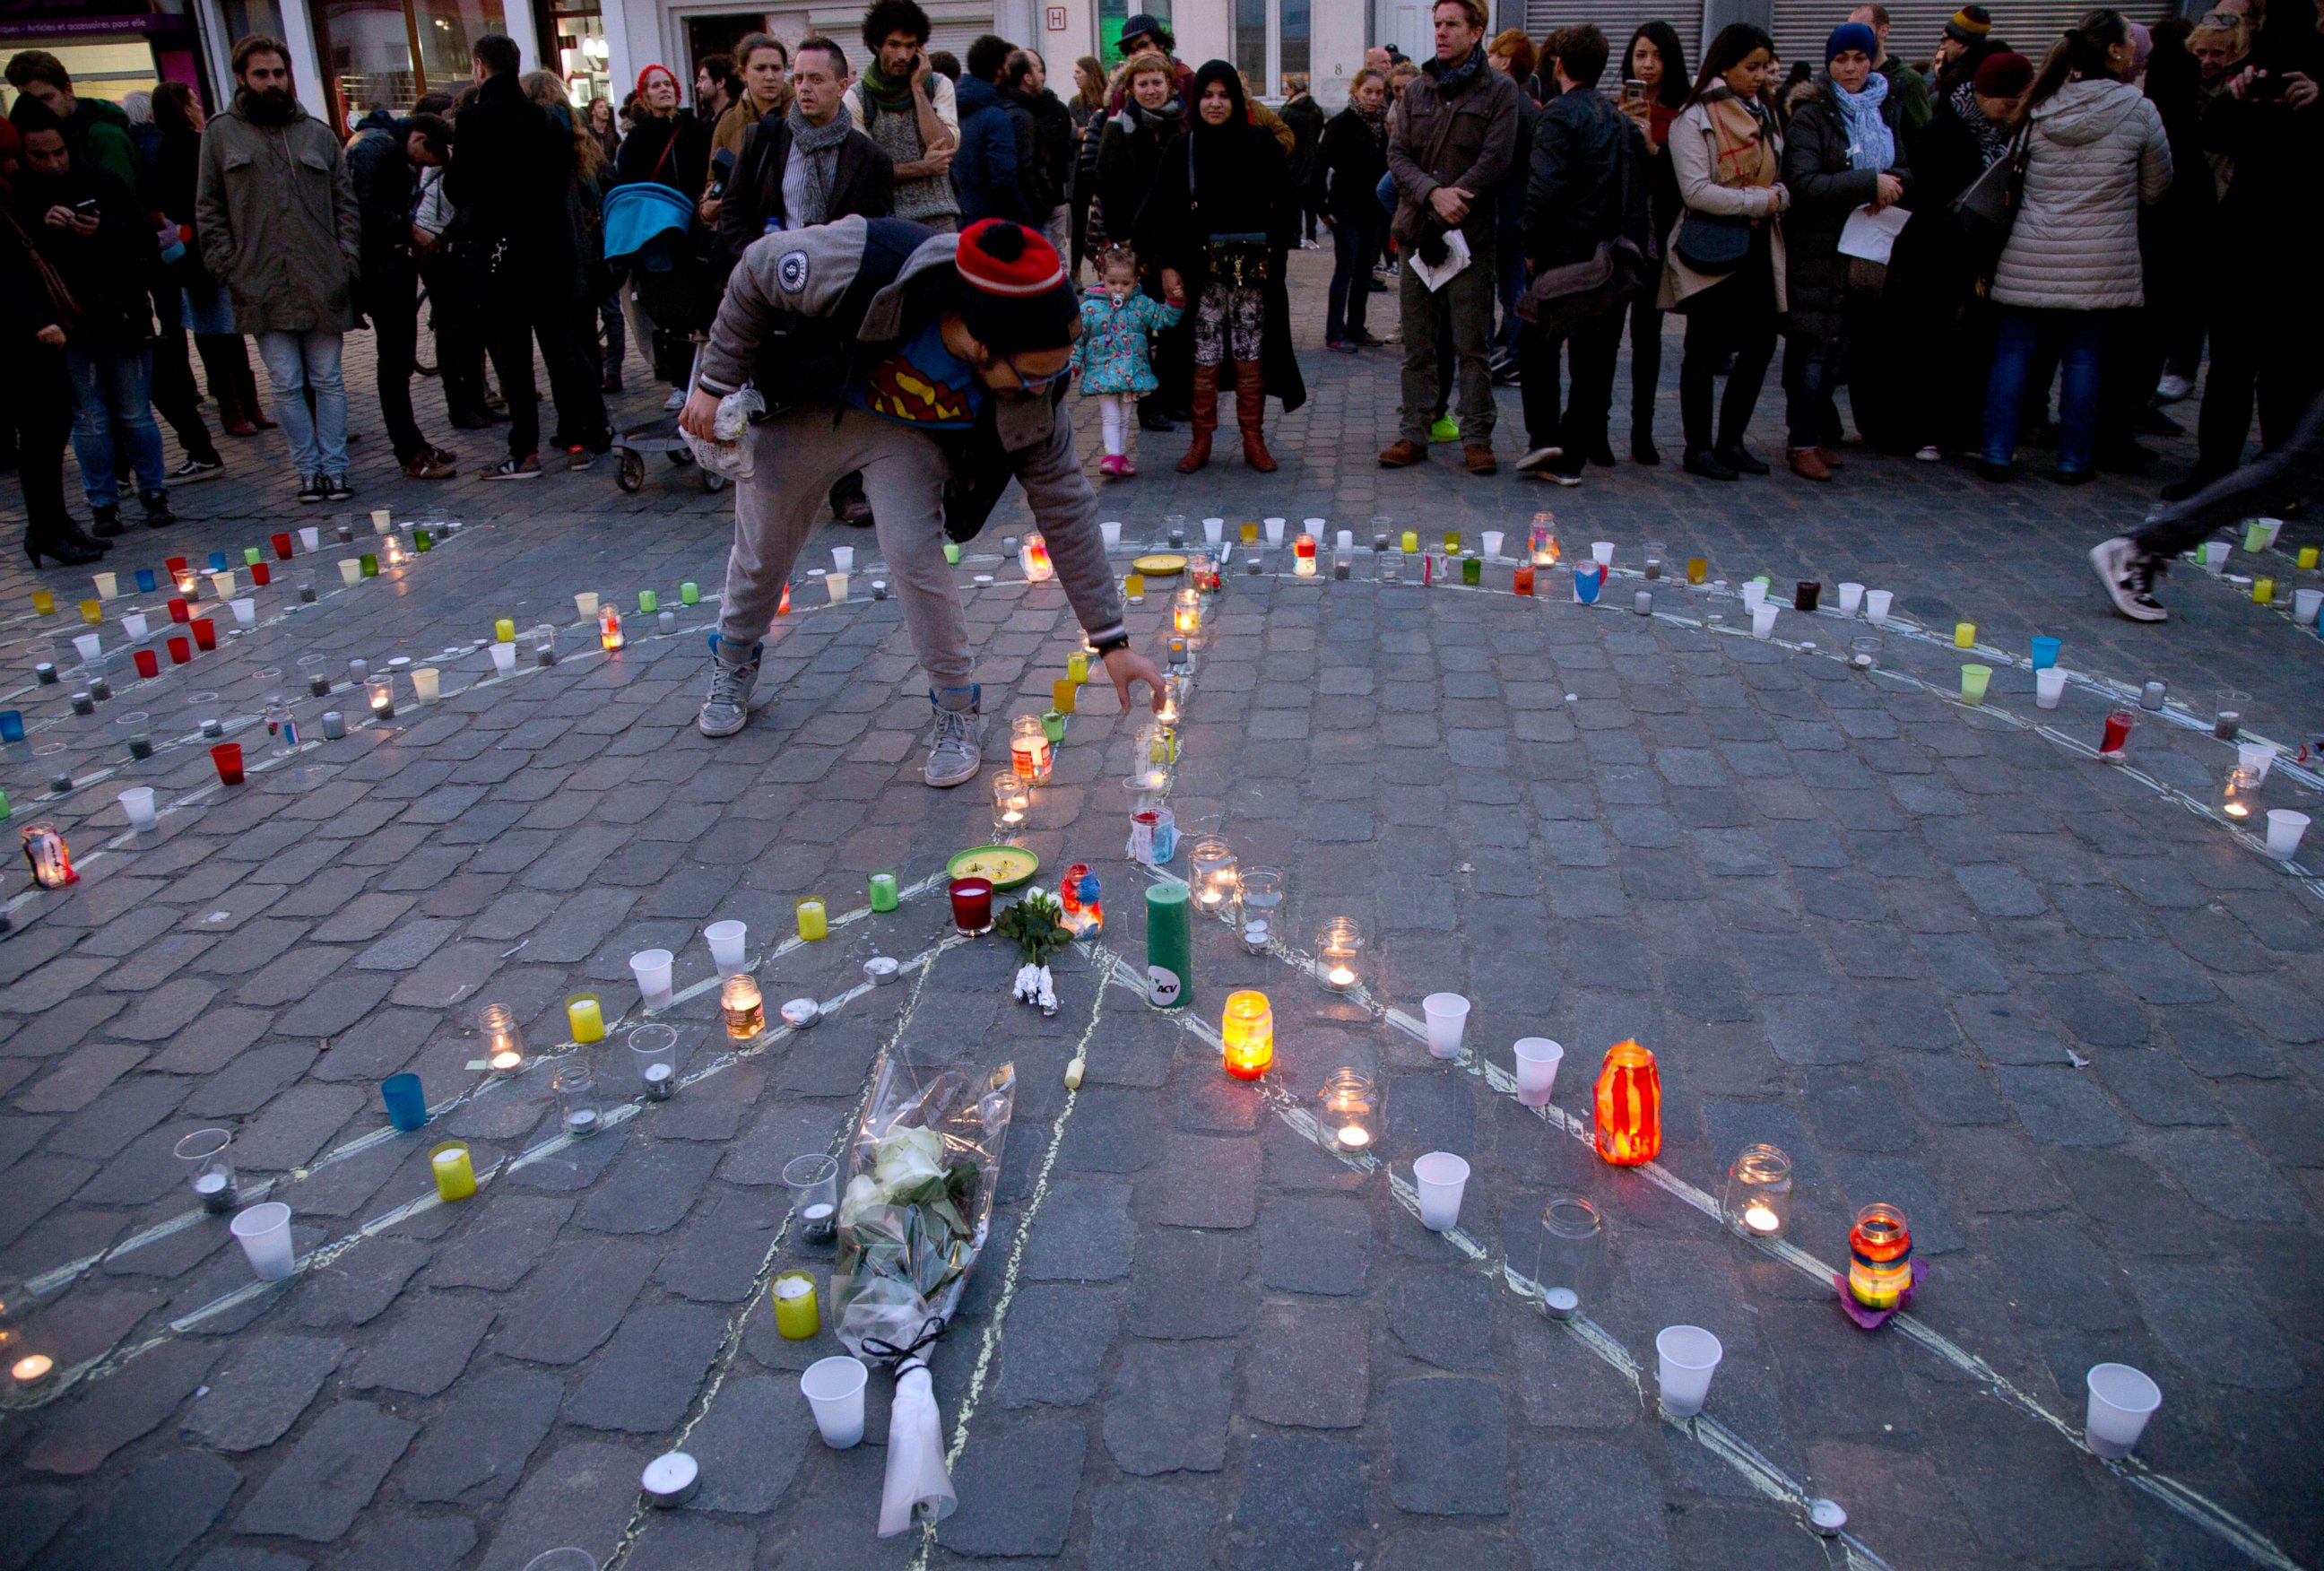 PHOTO: A man lights a candle which forms a peace sign during a candlelight vigil for the Paris attacks in the town square of Molenbeek, Belgium, Nov. 18, 2015. 